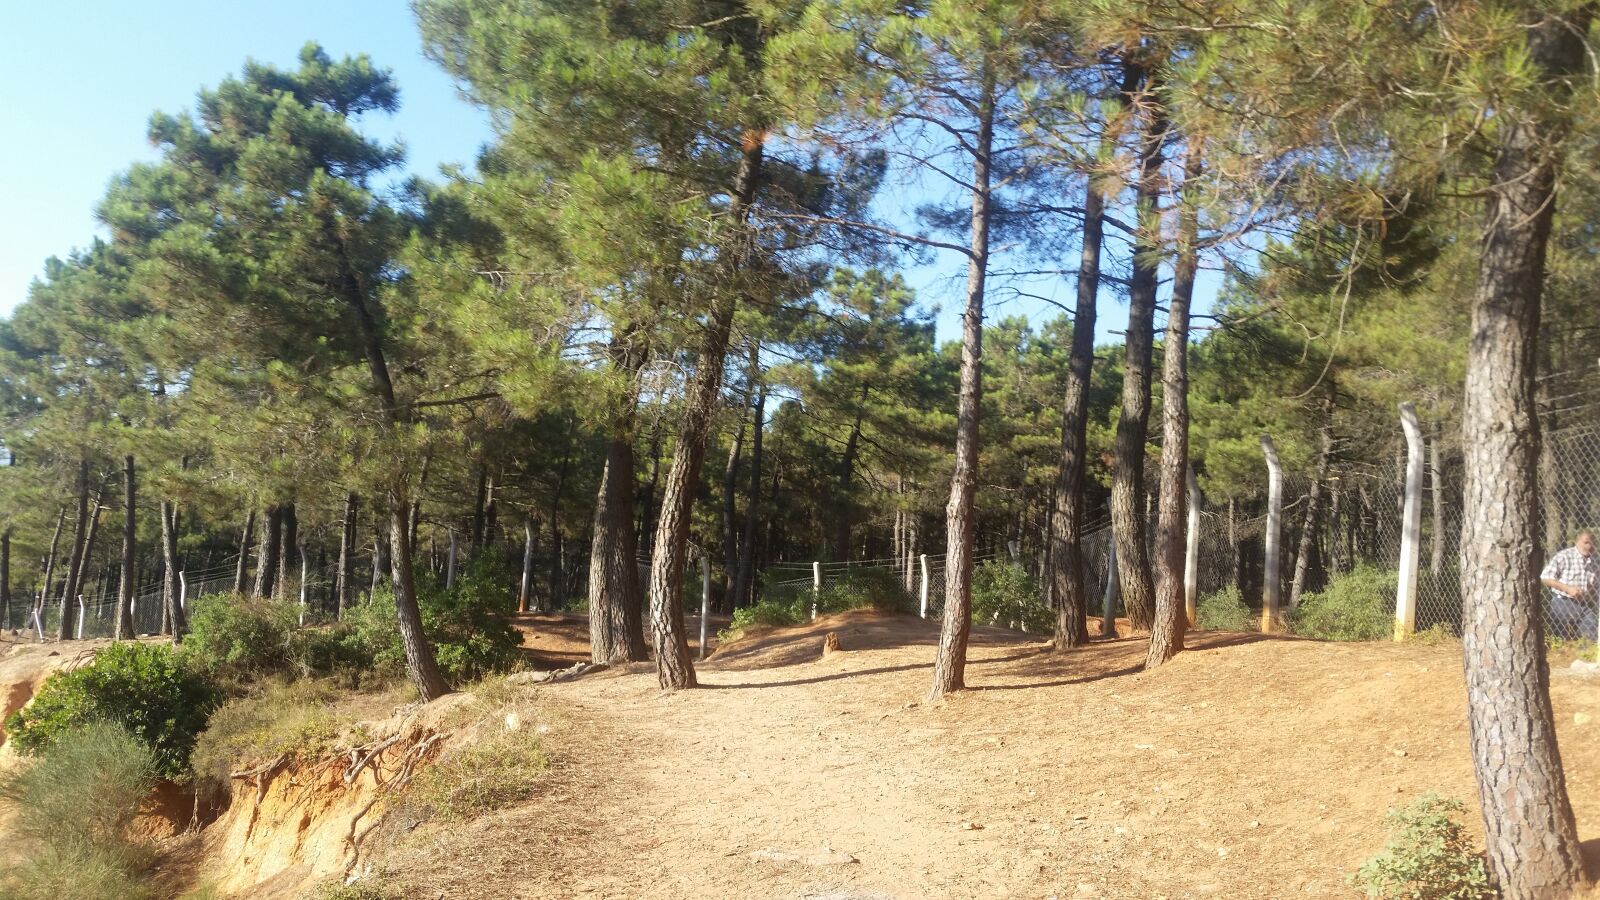 Samsung Galaxy S5 sample photo. Forest, pine tree, nature photography